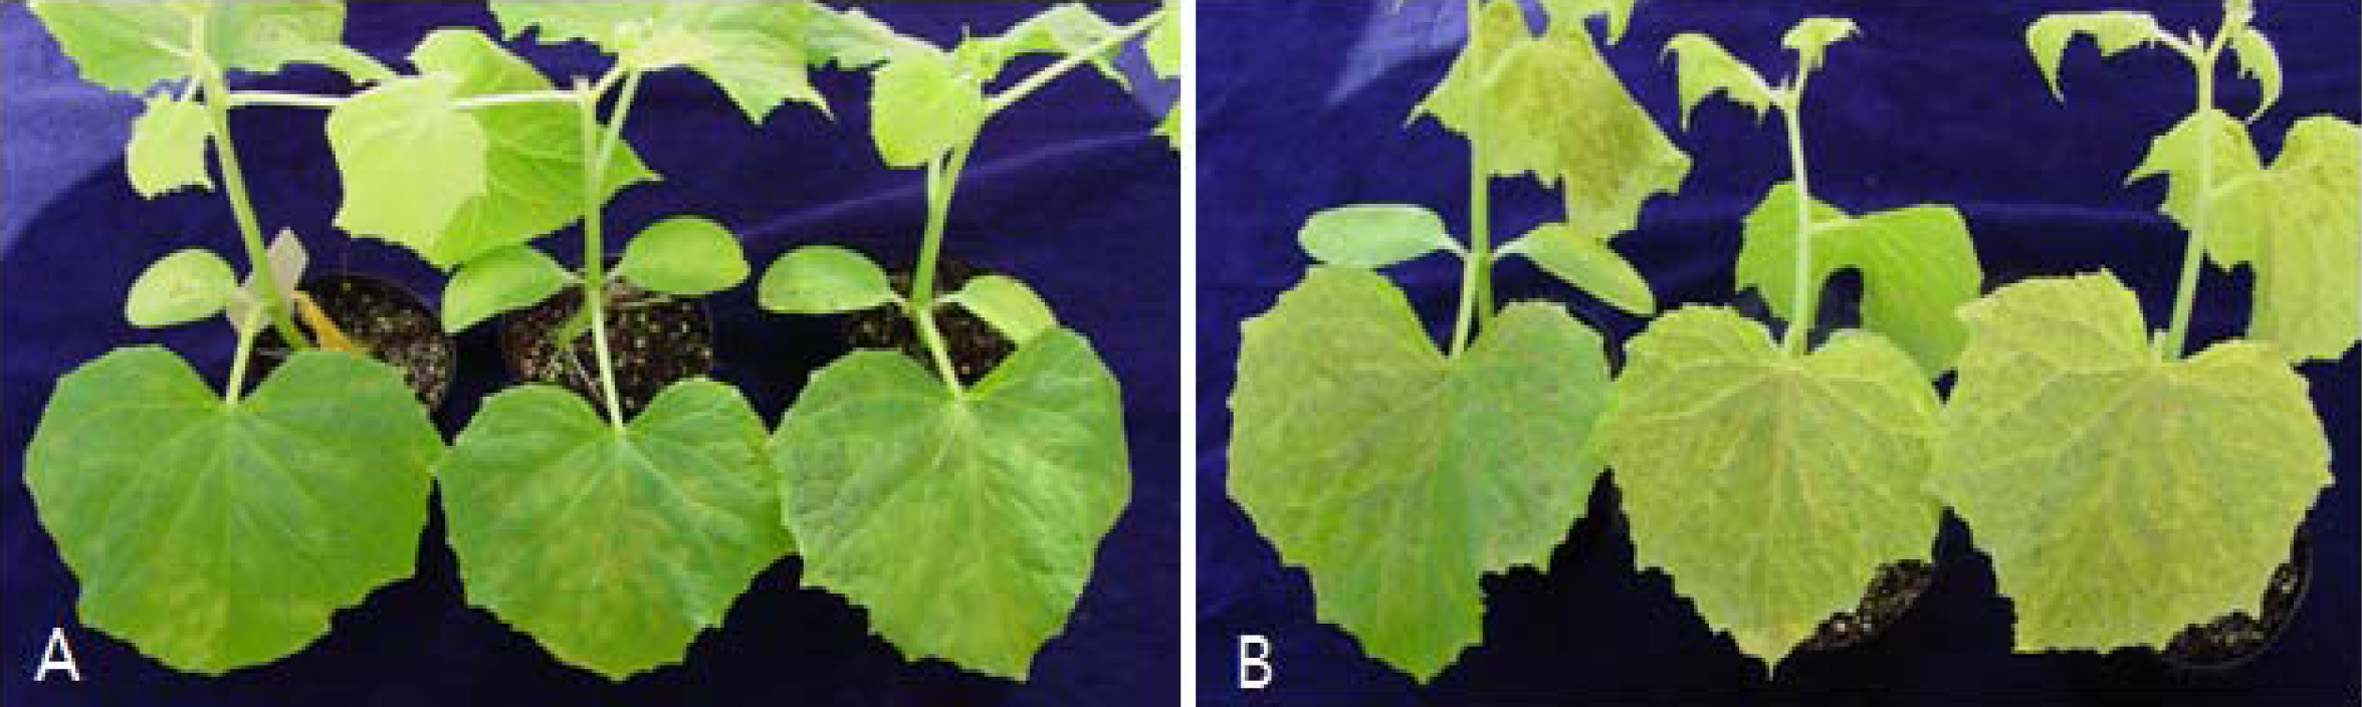 Control effect of downy mildew on the cucumber seedling treated with CC110 isolate.